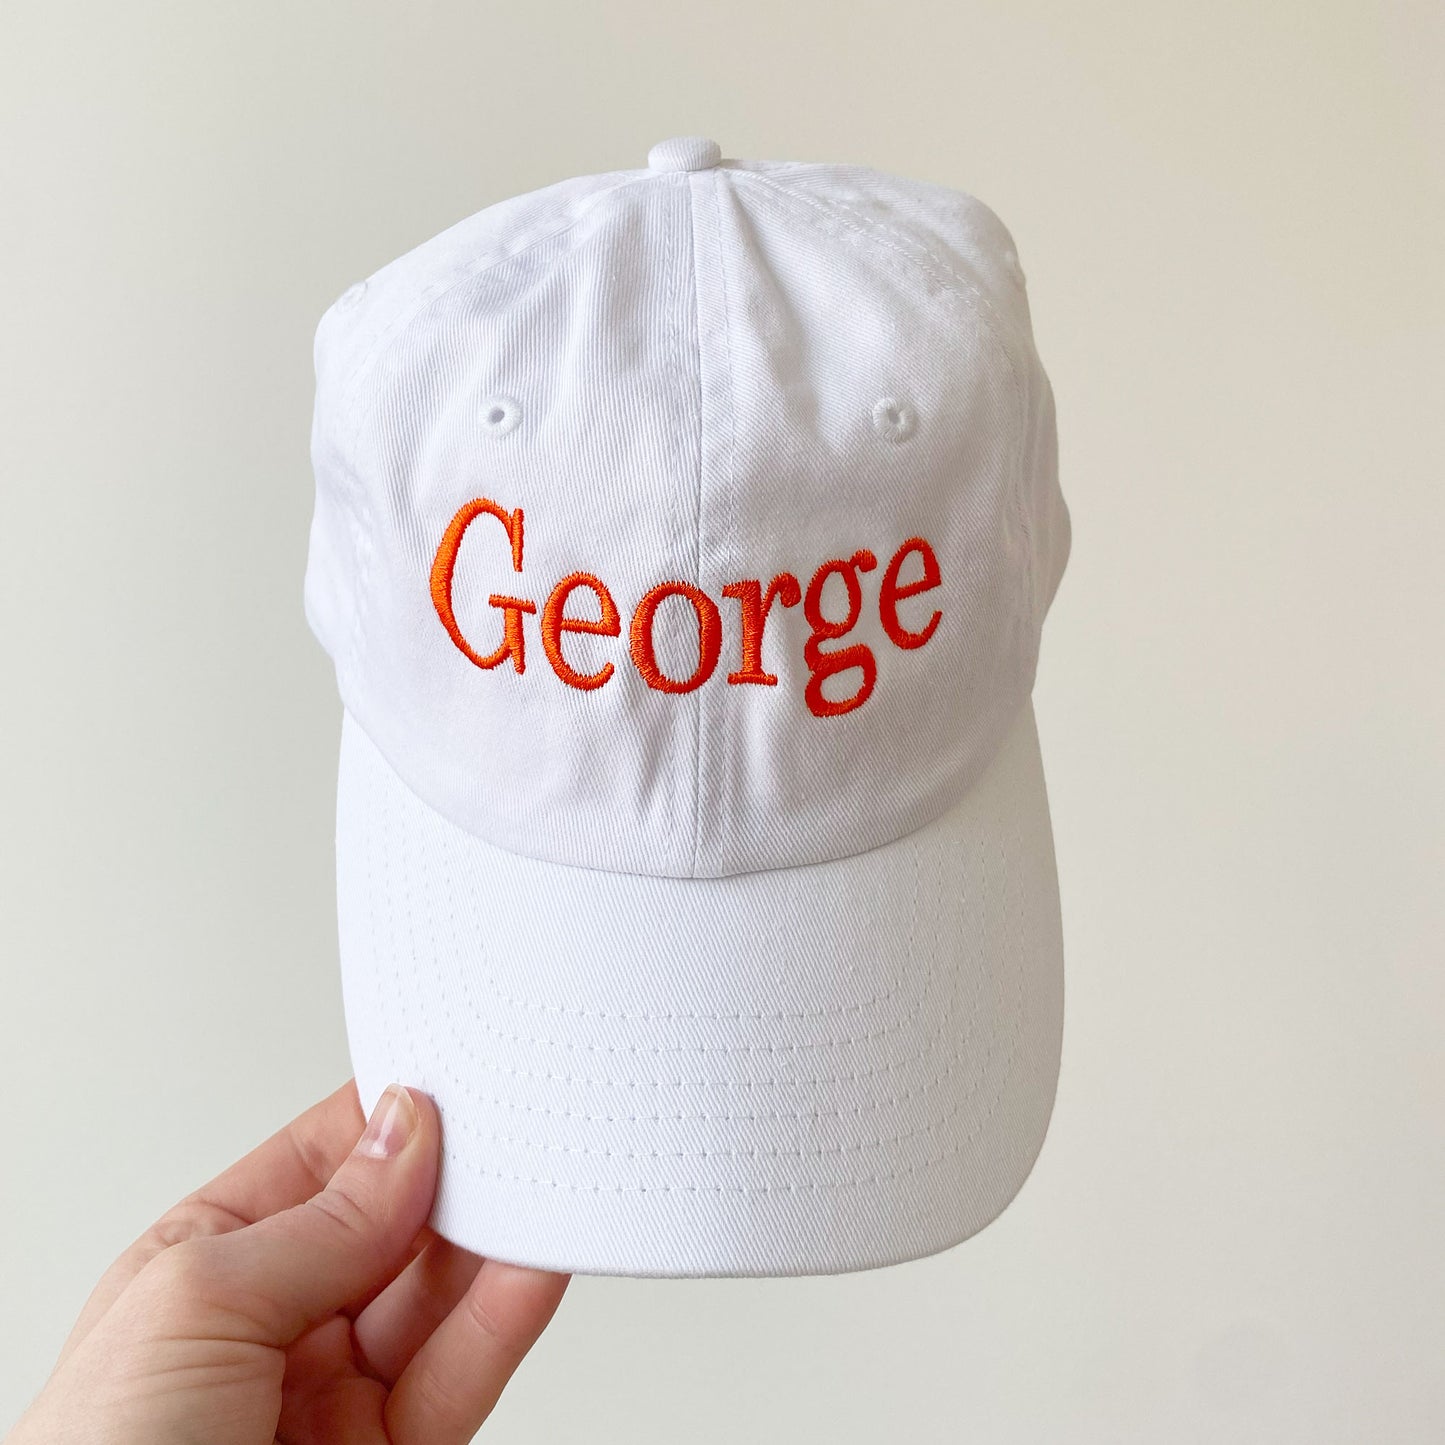 youth white baseball hat with George embroidered in orange thread